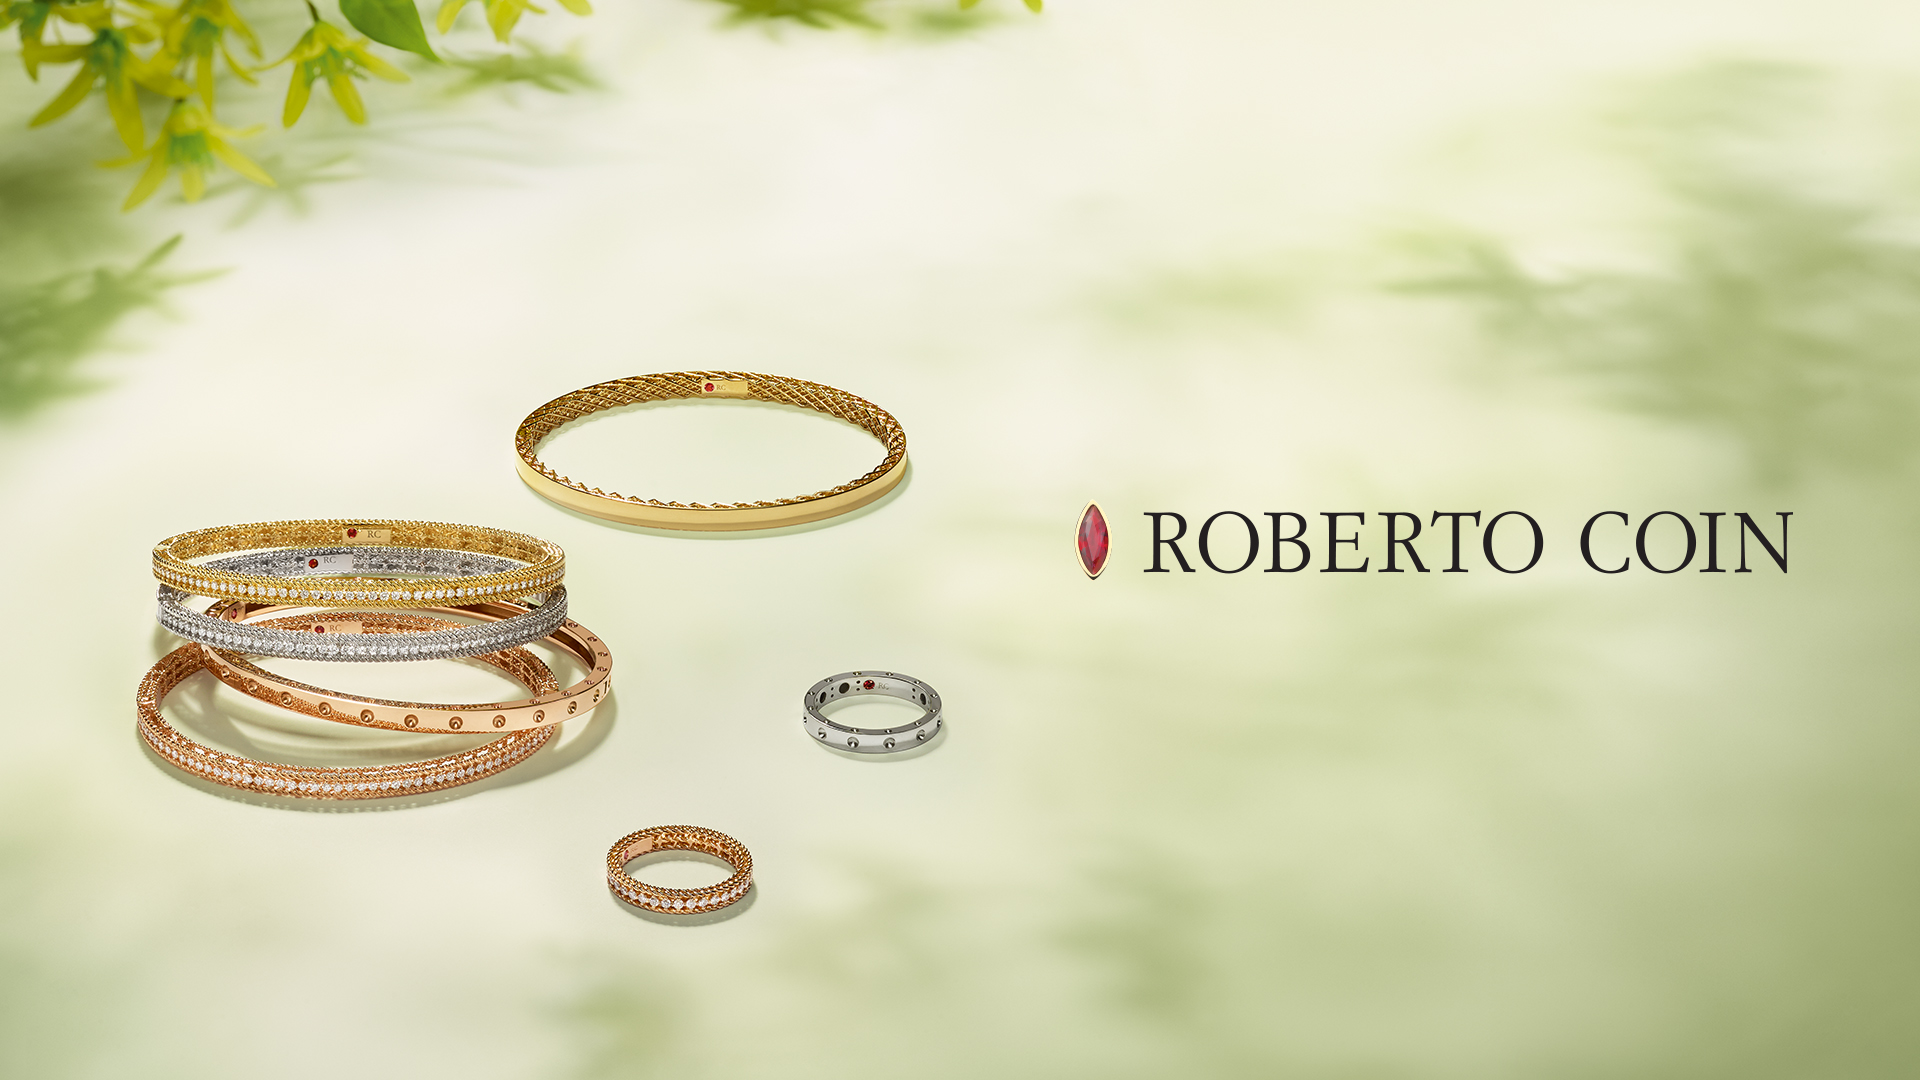 Roberto Coin, Bracelet, Bracelets, Rings, Jewelry, Fine Jewelry, Jewelry Stores, Geiss and Sons, Greenville, South Carolina